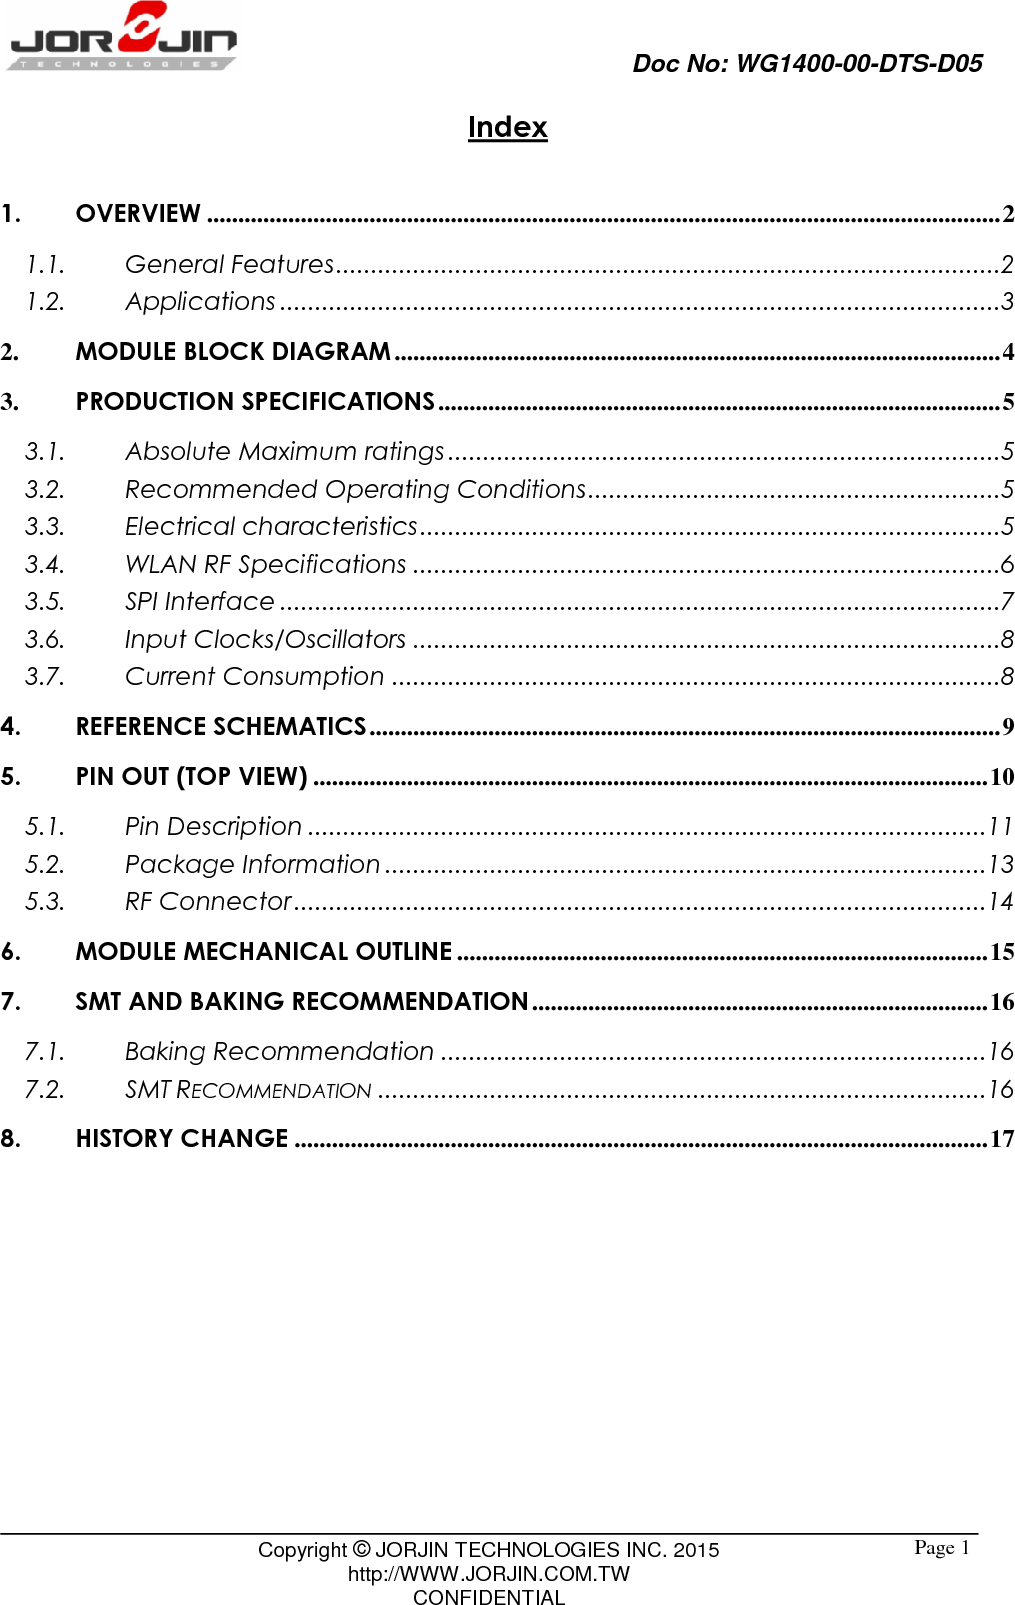                                Doc No: WG1400-00-DTS-D05                                                                                                 Copyright © JORJIN TECHNOLOGIES INC. 2015 http://WWW.JORJIN.COM.TW CONFIDENTIAL  Page 1Index  1. OVERVIEW ............................................................................................................................... 2 1.1. General Features ............................................................................................... 2 1.2. Applications ....................................................................................................... 3 2. MODULE BLOCK DIAGRAM ................................................................................................. 4 3. PRODUCTION SPECIFICATIONS .......................................................................................... 5 3.1. Absolute Maximum ratings ............................................................................... 5 3.2. Recommended Operating Conditions ........................................................... 5 3.3. Electrical characteristics ................................................................................... 5 3.4. WLAN RF Specifications .................................................................................... 6 3.5. SPI Interface ....................................................................................................... 7 3.6. Input Clocks/Oscillators .................................................................................... 8 3.7. Current Consumption ....................................................................................... 8 4. REFERENCE SCHEMATICS ..................................................................................................... 9 5. PIN OUT (TOP VIEW) ............................................................................................................ 10 5.1. Pin Description ................................................................................................. 11 5.2. Package Information ...................................................................................... 13 5.3. RF Connector ................................................................................................... 14 6. MODULE MECHANICAL OUTLINE ..................................................................................... 15 7. SMT AND BAKING RECOMMENDATION ......................................................................... 16 7.1. Baking Recommendation .............................................................................. 16 7.2. SMT RECOMMENDATION ....................................................................................... 16 8. HISTORY CHANGE ............................................................................................................... 17  